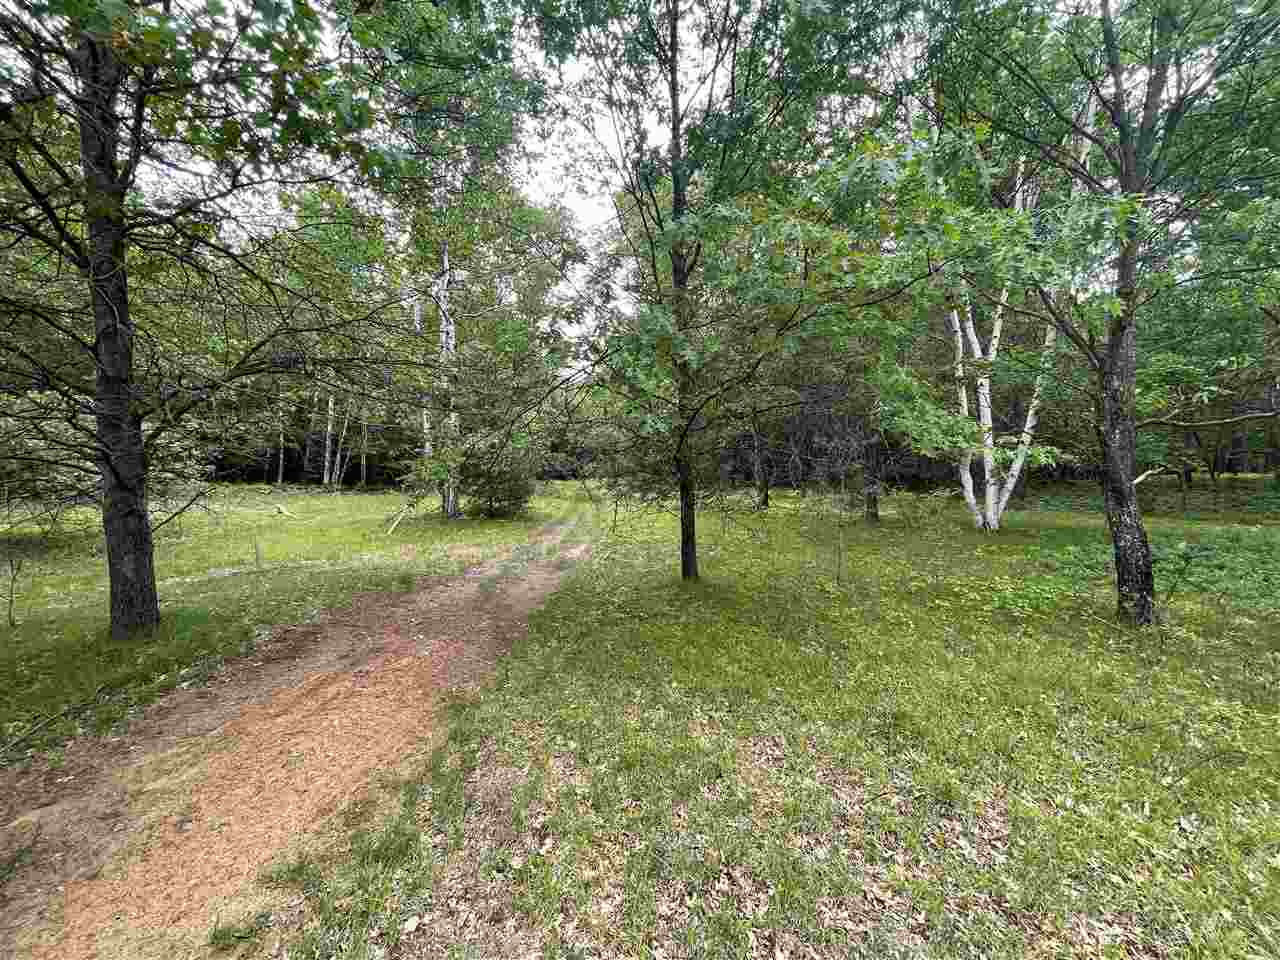 What a find!   Double lot equaling .61 acres in Lake James and includes private access to multiple parks with sandy beaches. PLUS  a bonus parcel of 1.62 acres adjoining the Lake James lots which is secluded and previously perked tested and has a driveway.  Great area for building  or ORV/snowmobile trails